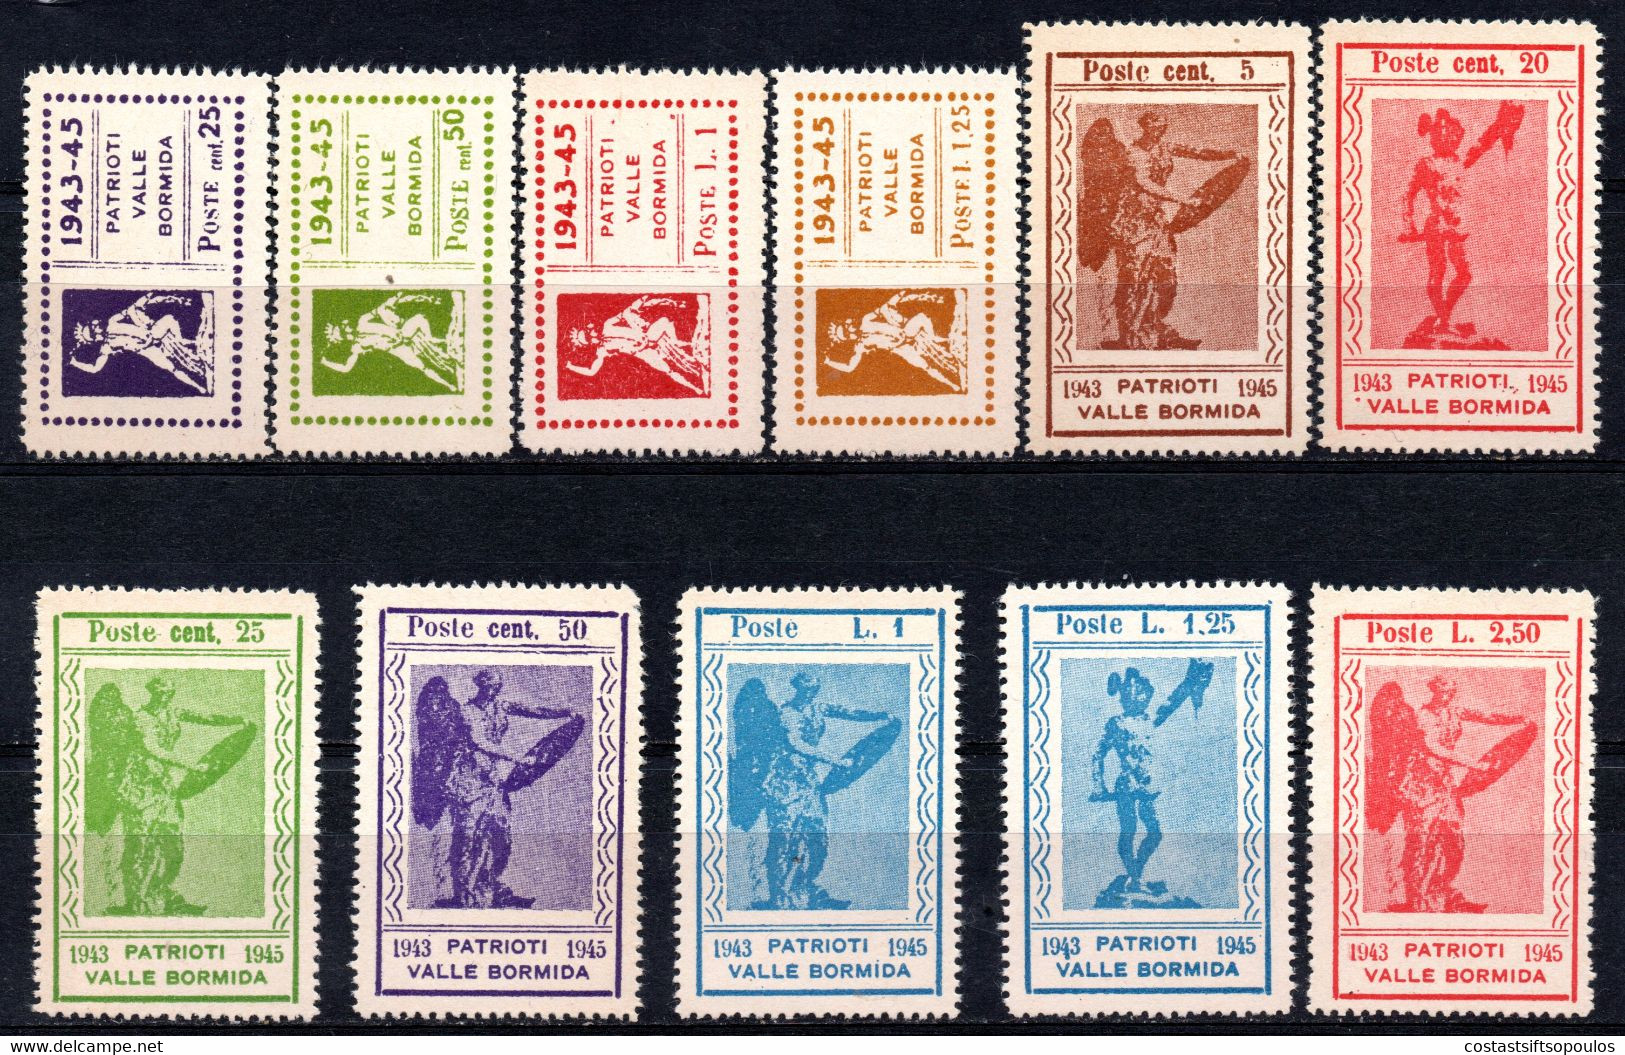 1428. ITALY. 1945 PATRIOTI VALLE BORMIDA SETS WITHOUT GUM. FREE SHIPPING BY REGISTERED MAIL. - National Liberation Committee (CLN)